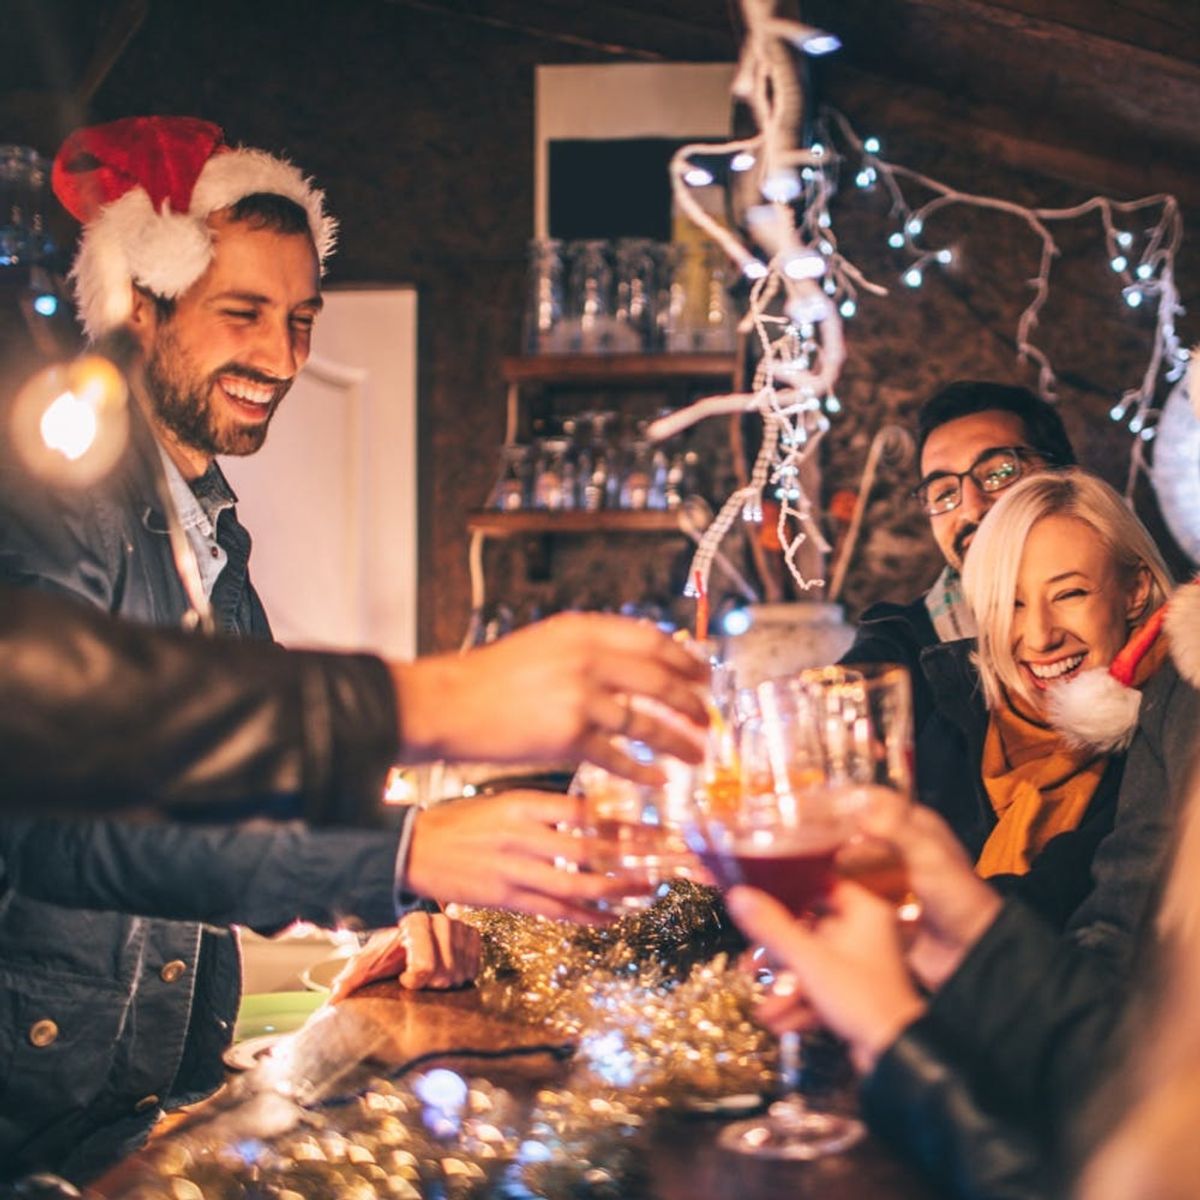 6 Common Holiday Relationship Conflicts and How to Avoid Them